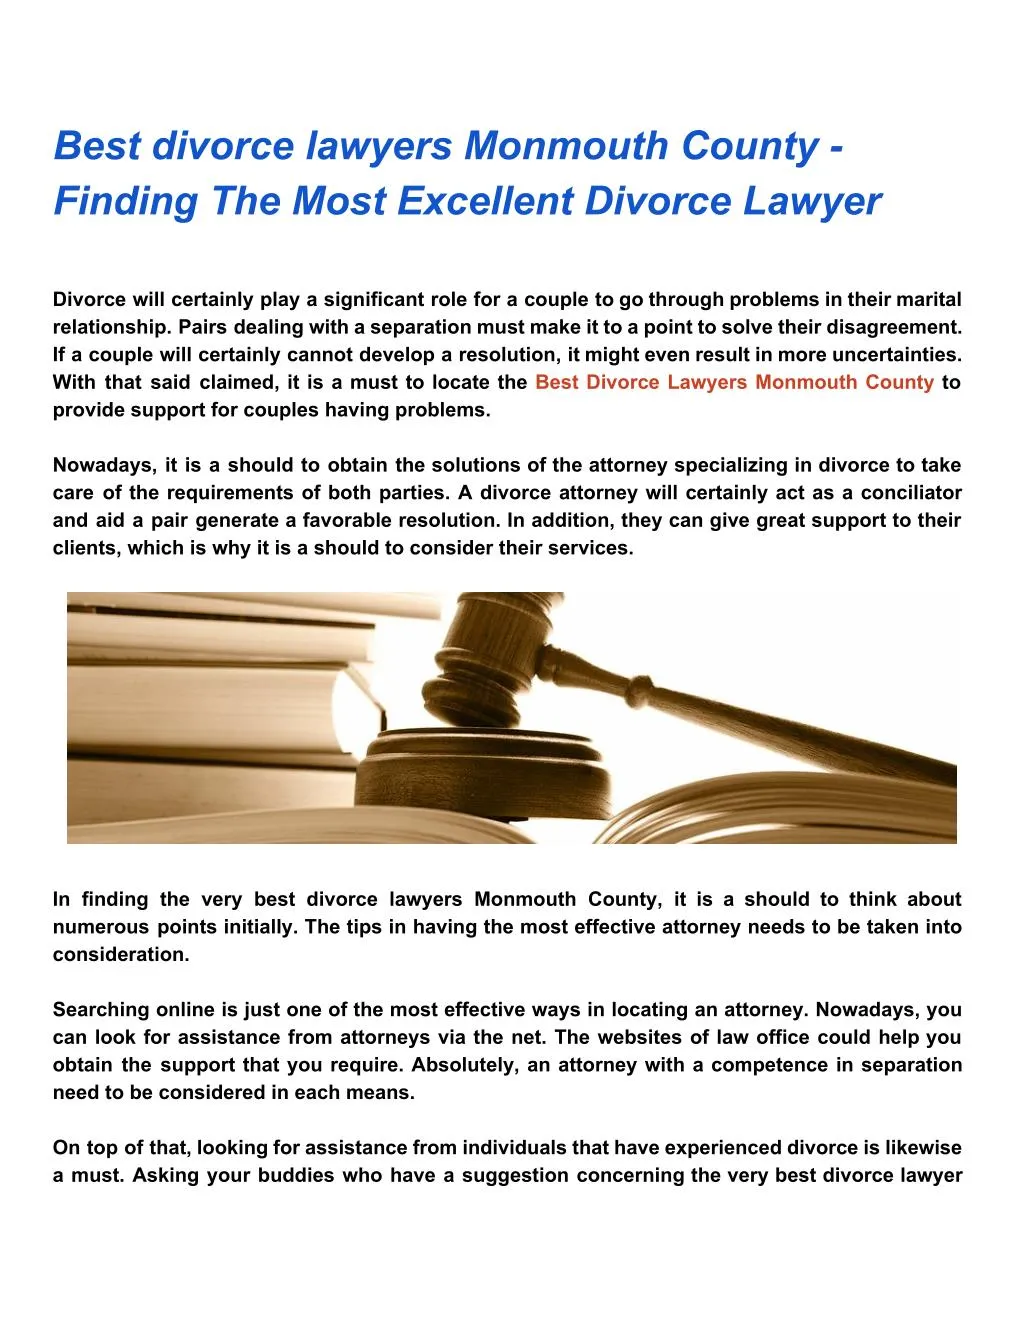 best divorce lawyers monmouth county finding